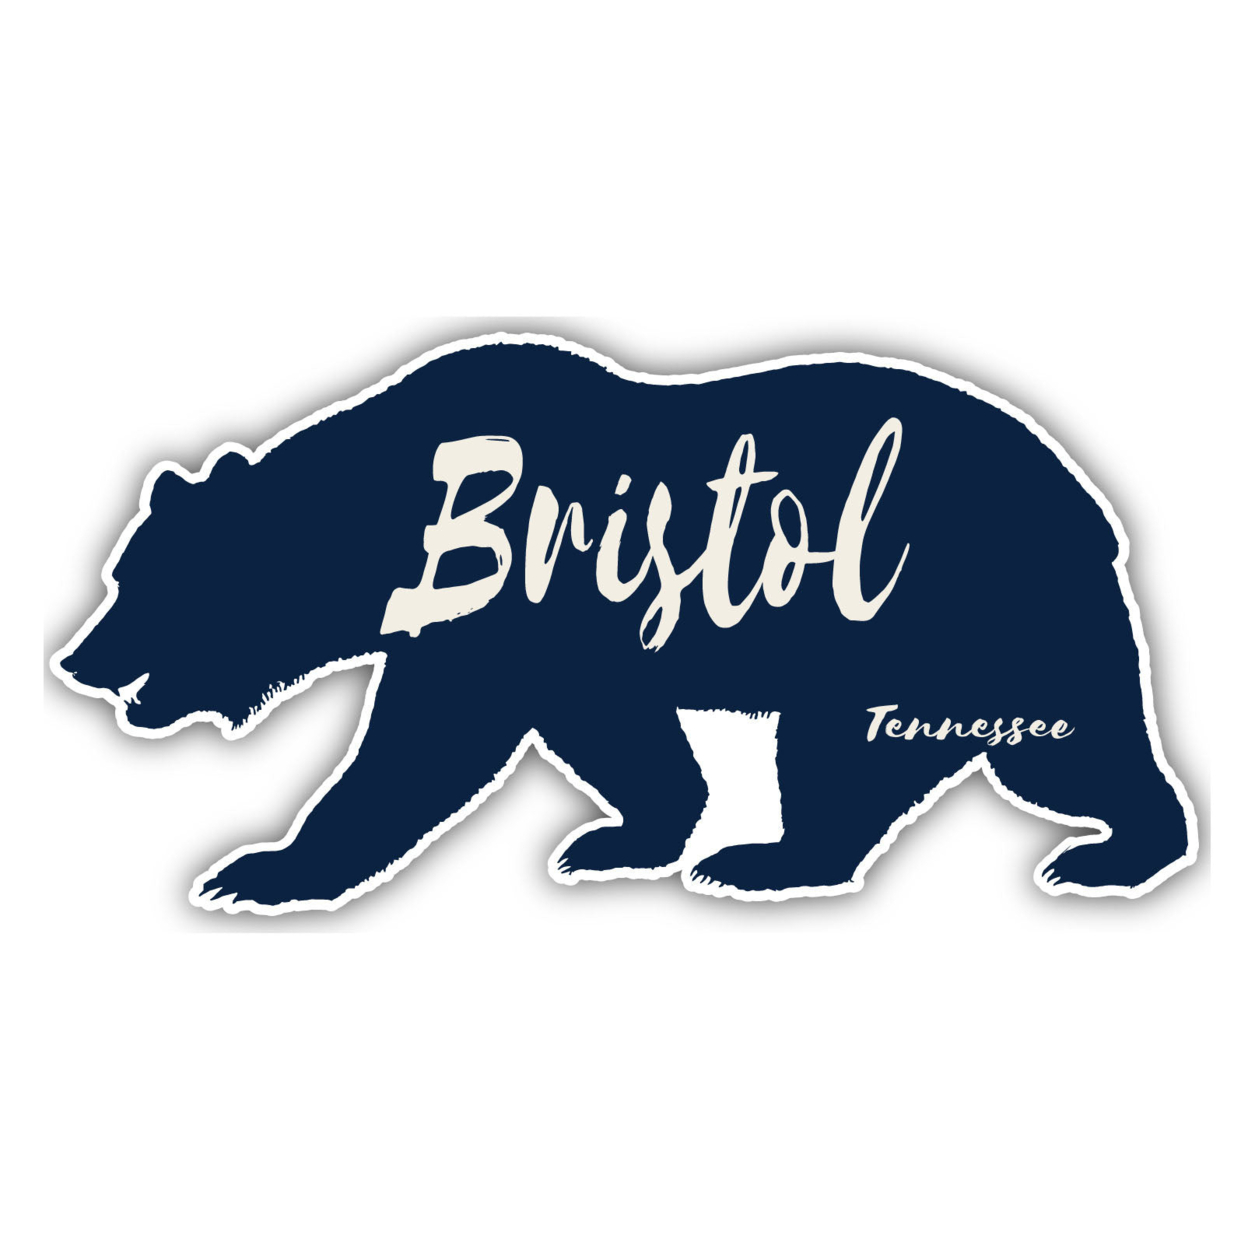 Bristol Tennessee Souvenir Decorative Stickers (Choose Theme And Size) - 4-Pack, 4-Inch, Bear